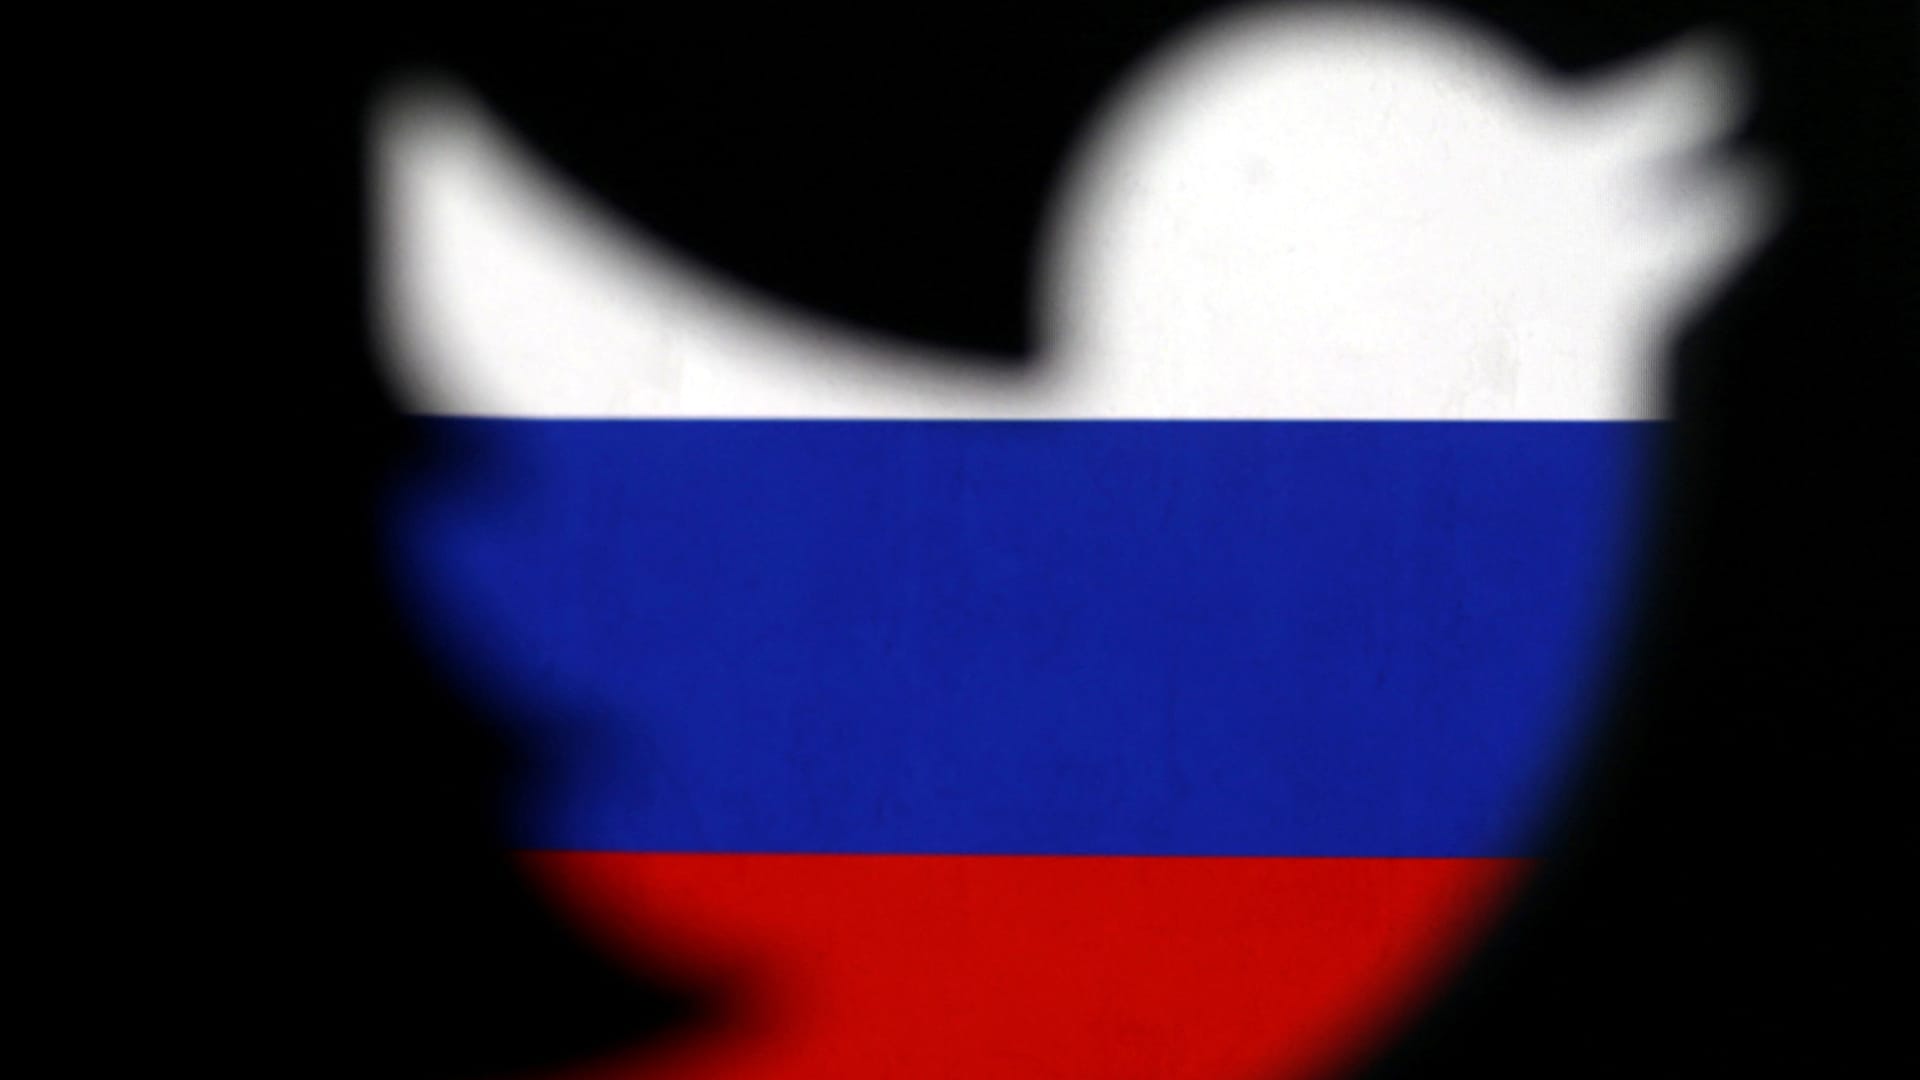 A 3D-printed Twitter logo displayed in front of Russian flag is seen in this illustration picture, October 27, 2017.